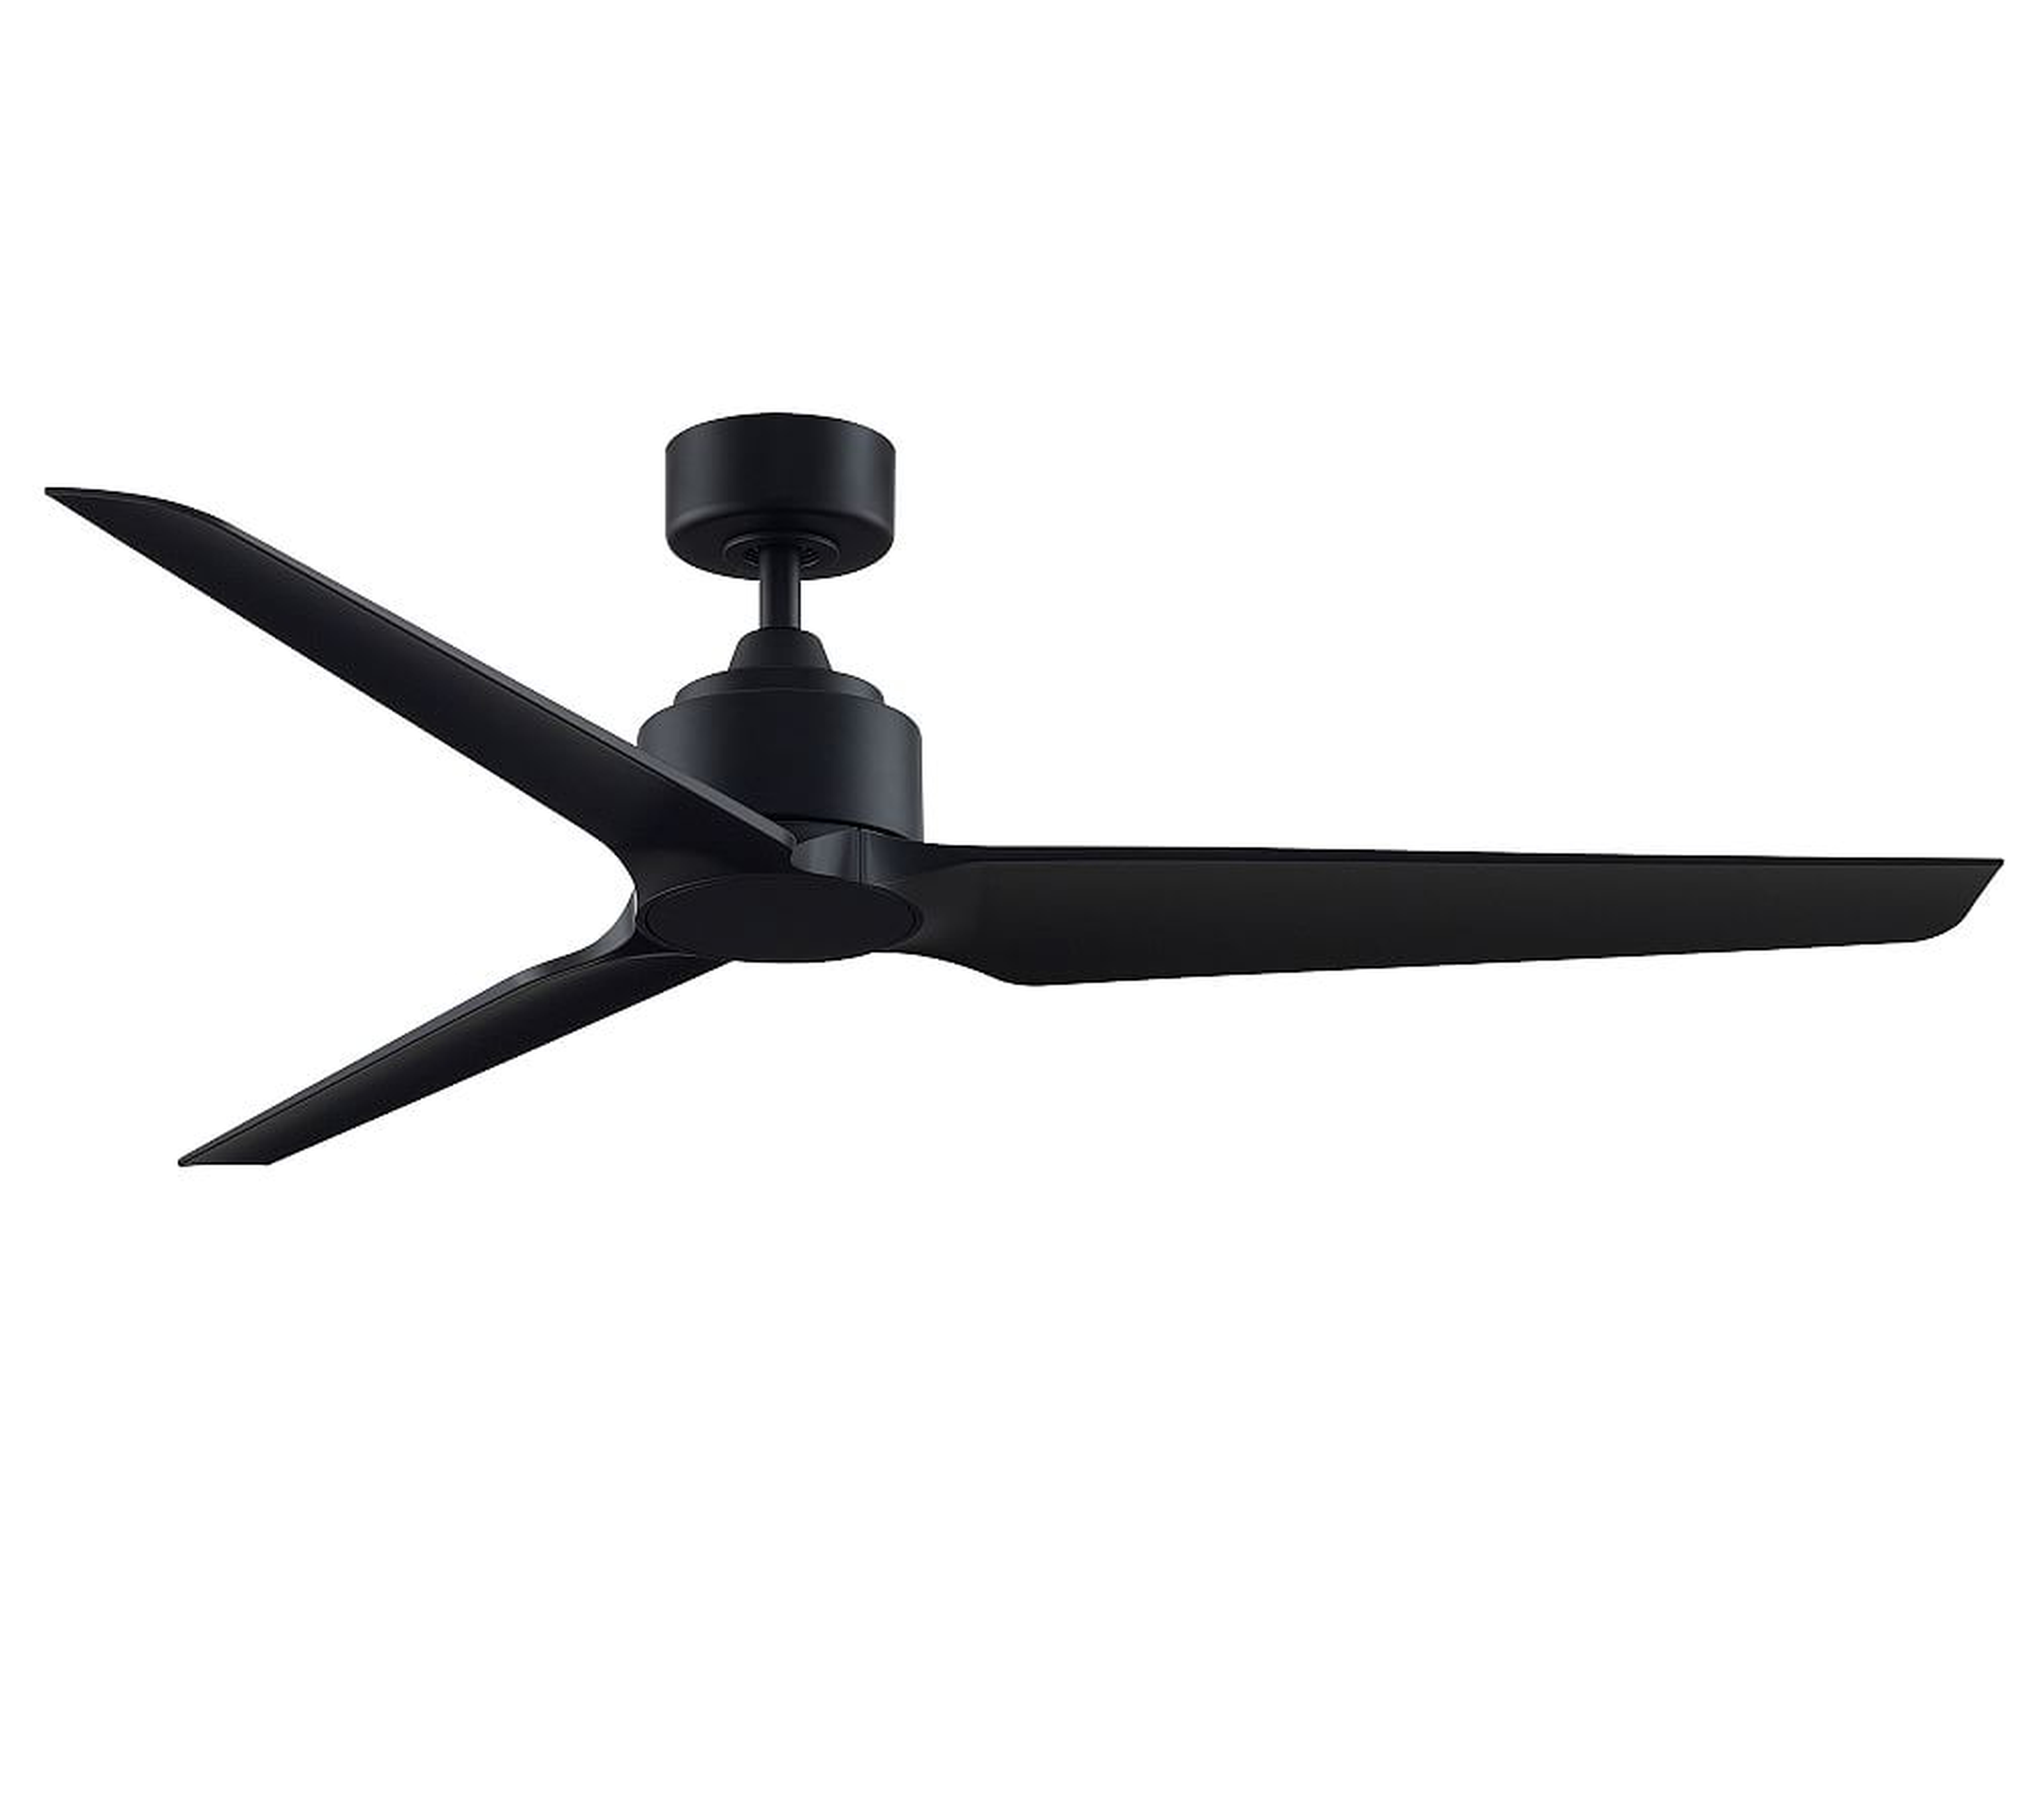 Triaire 60" Indoor/Outdoor Ceiling Fan, Black With Black Blades - Pottery Barn